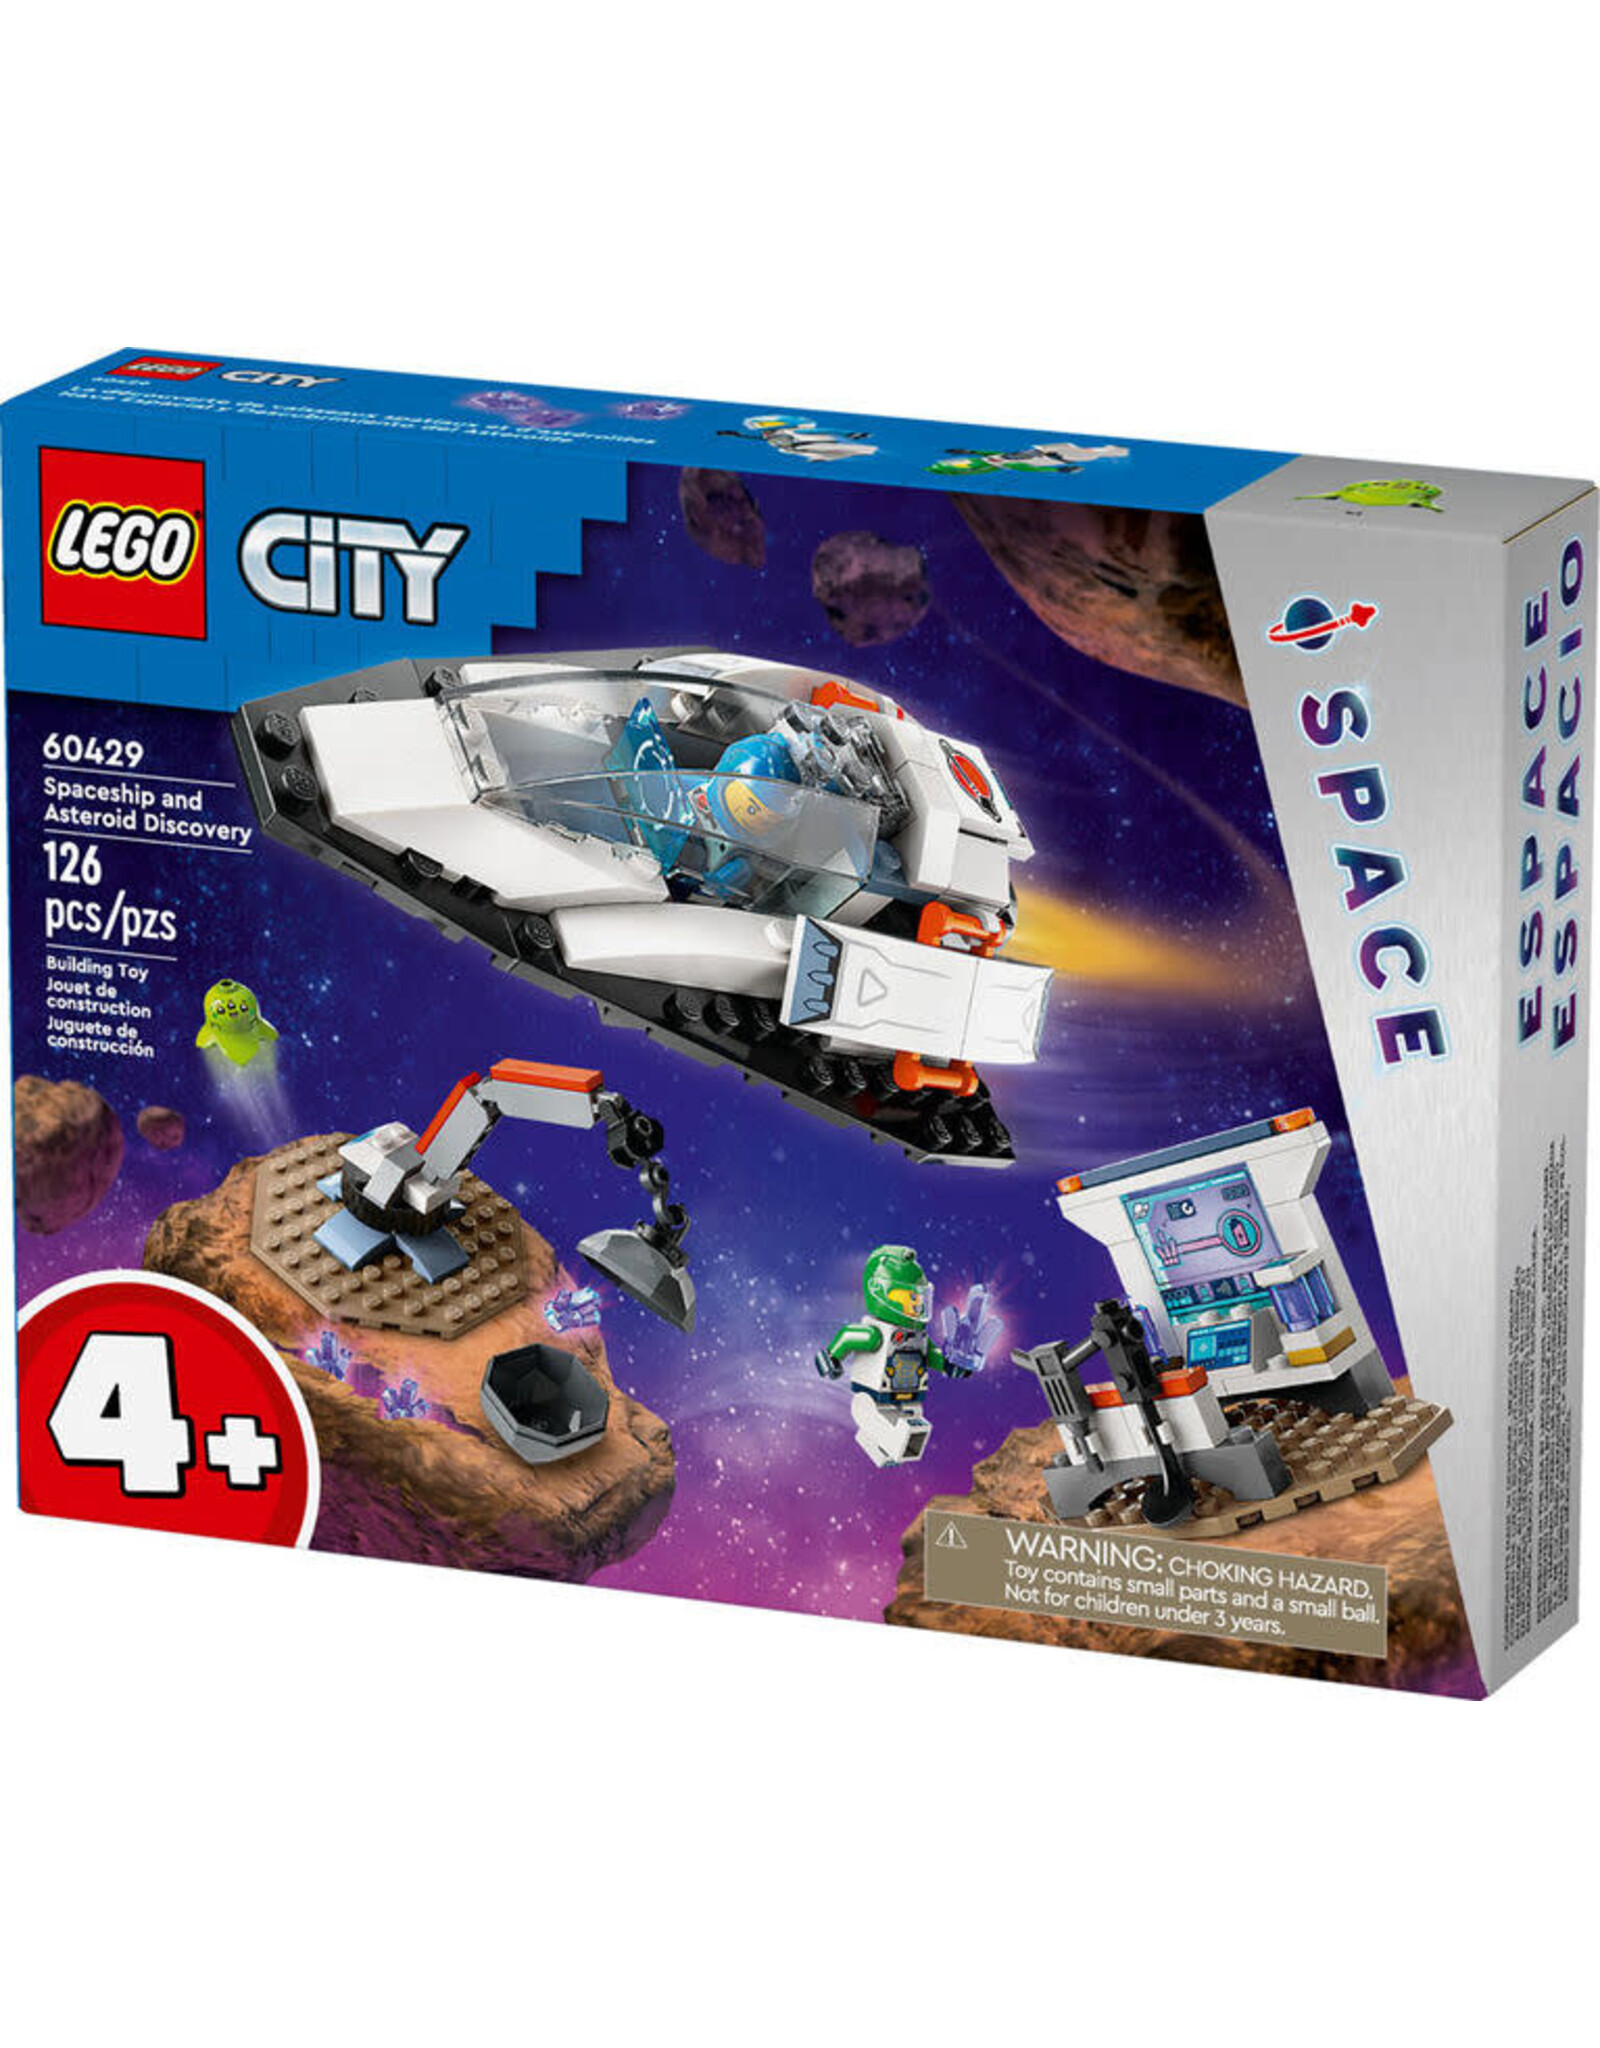 Lego Spaceship and Asteroid Discovery